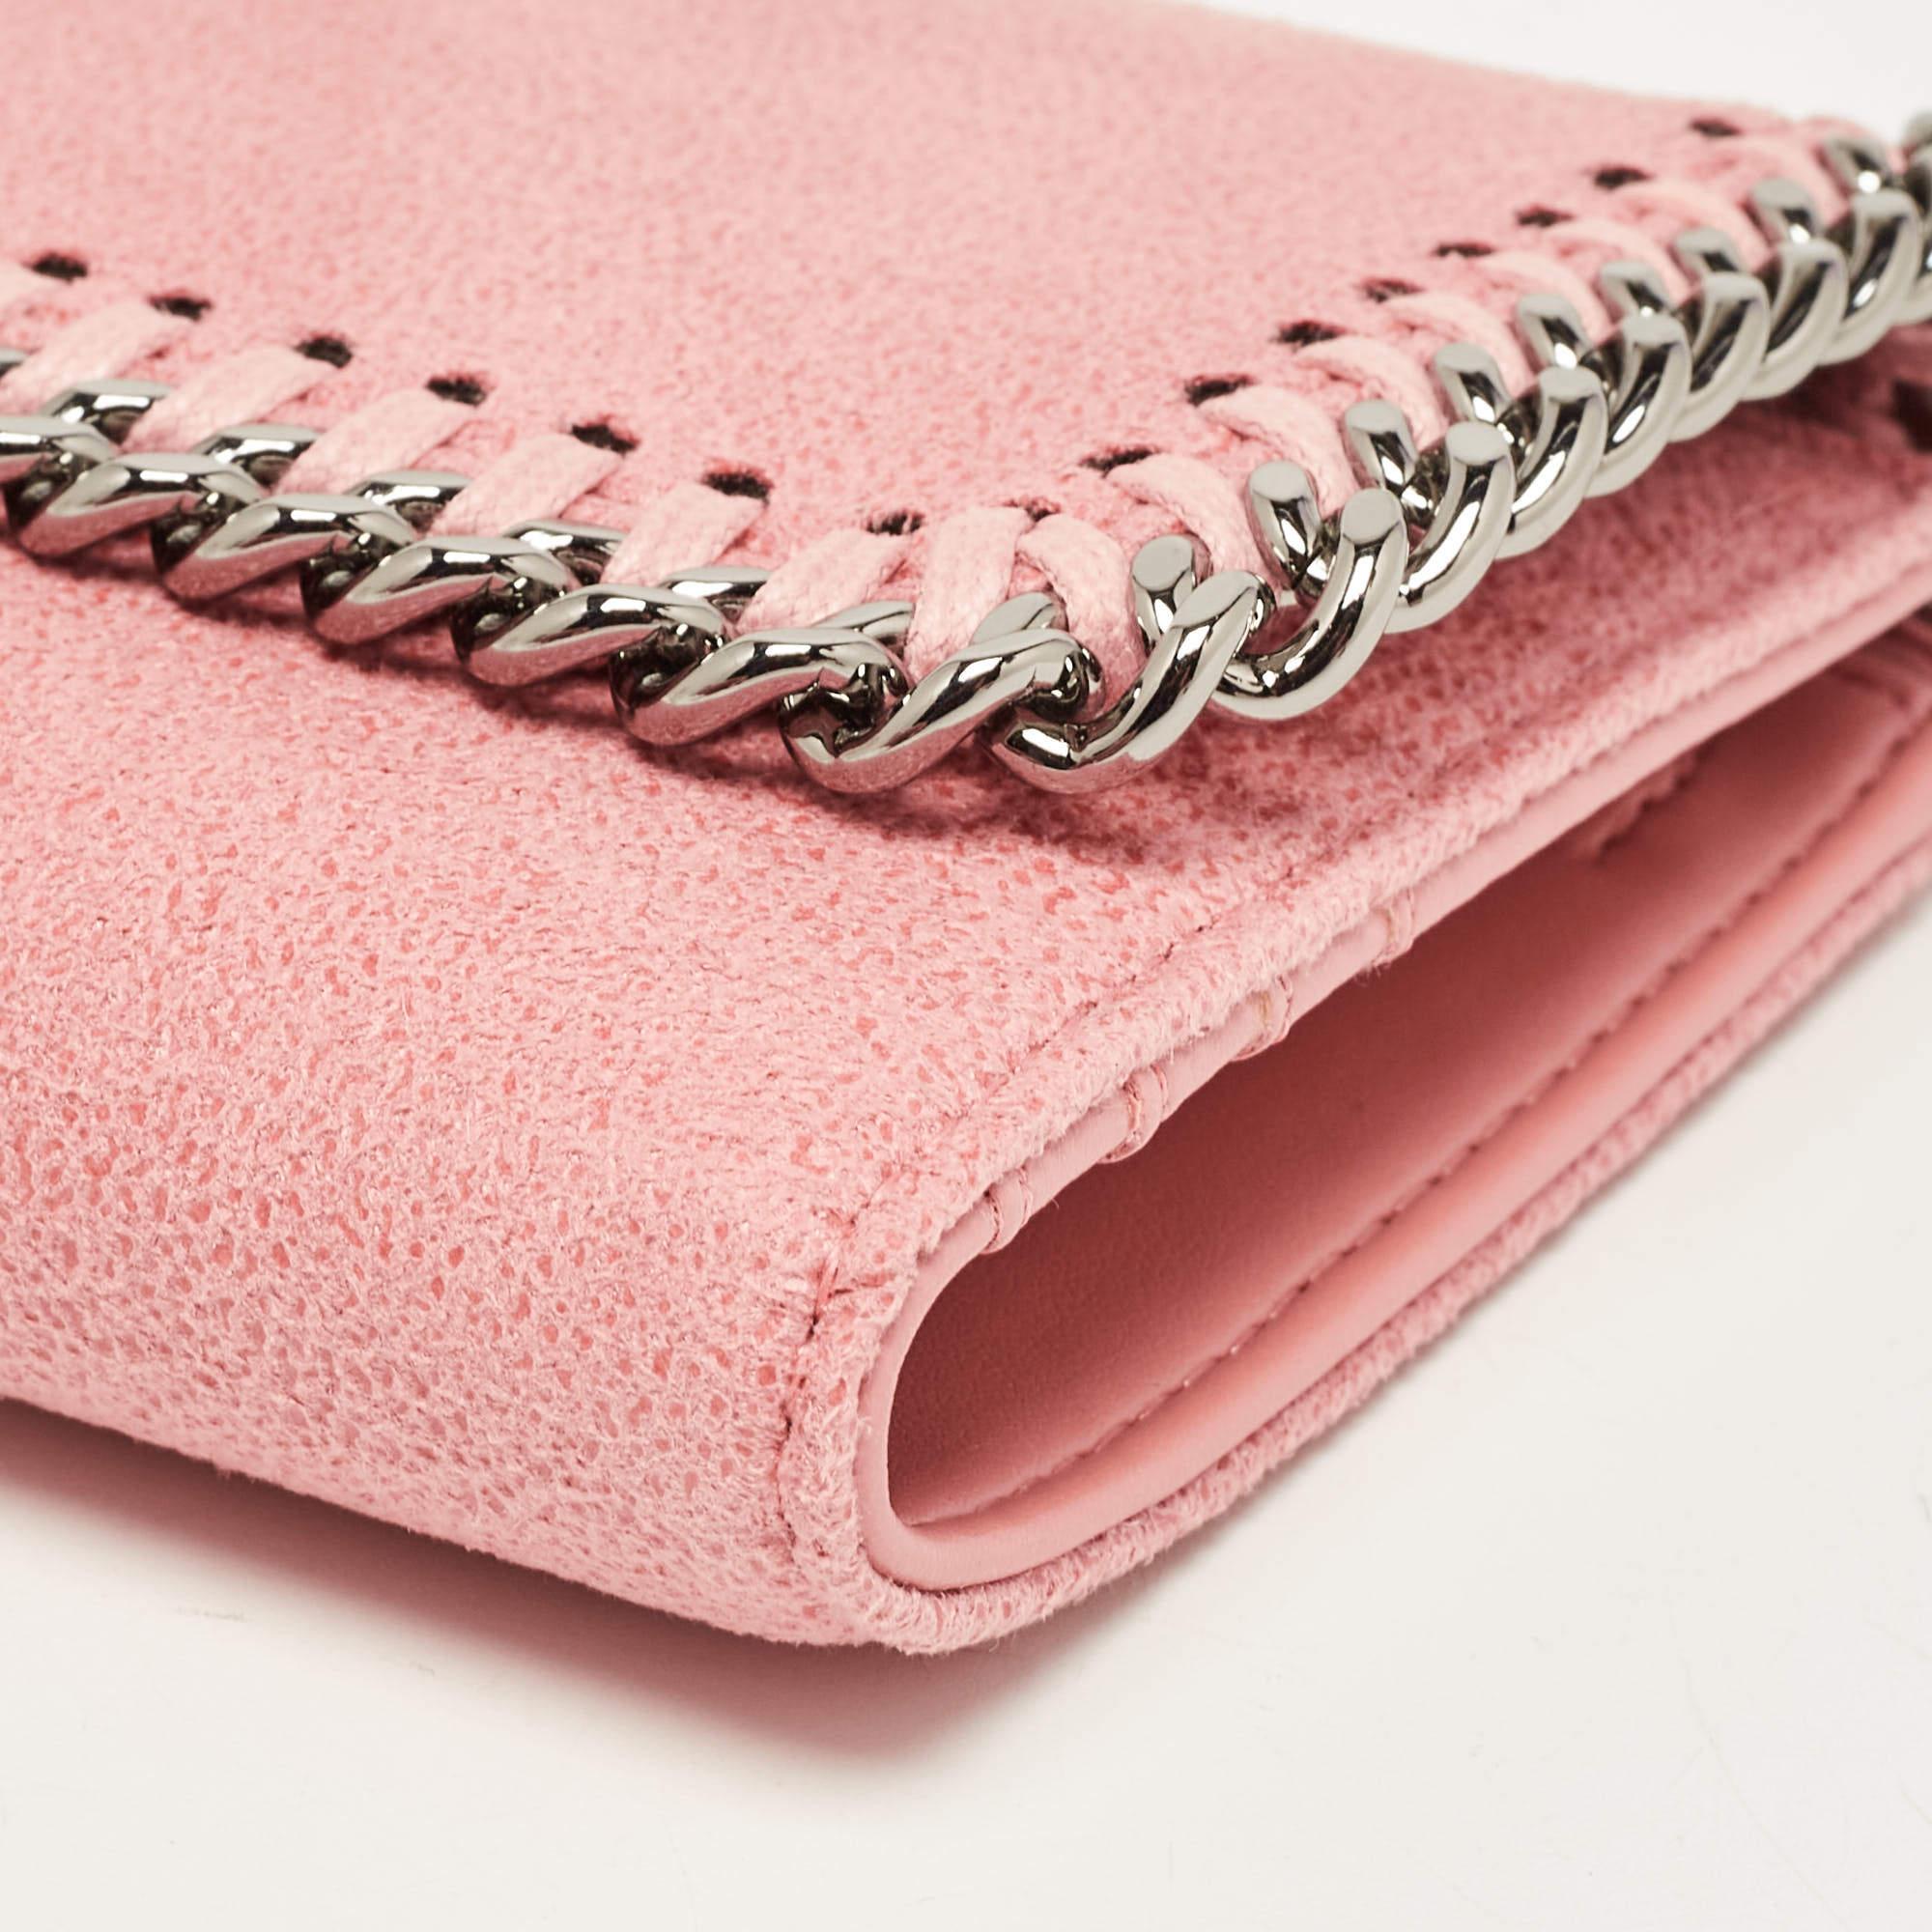 Stella McCartney Pink Faux Leather Falabella Compact Wallet For Sale 3